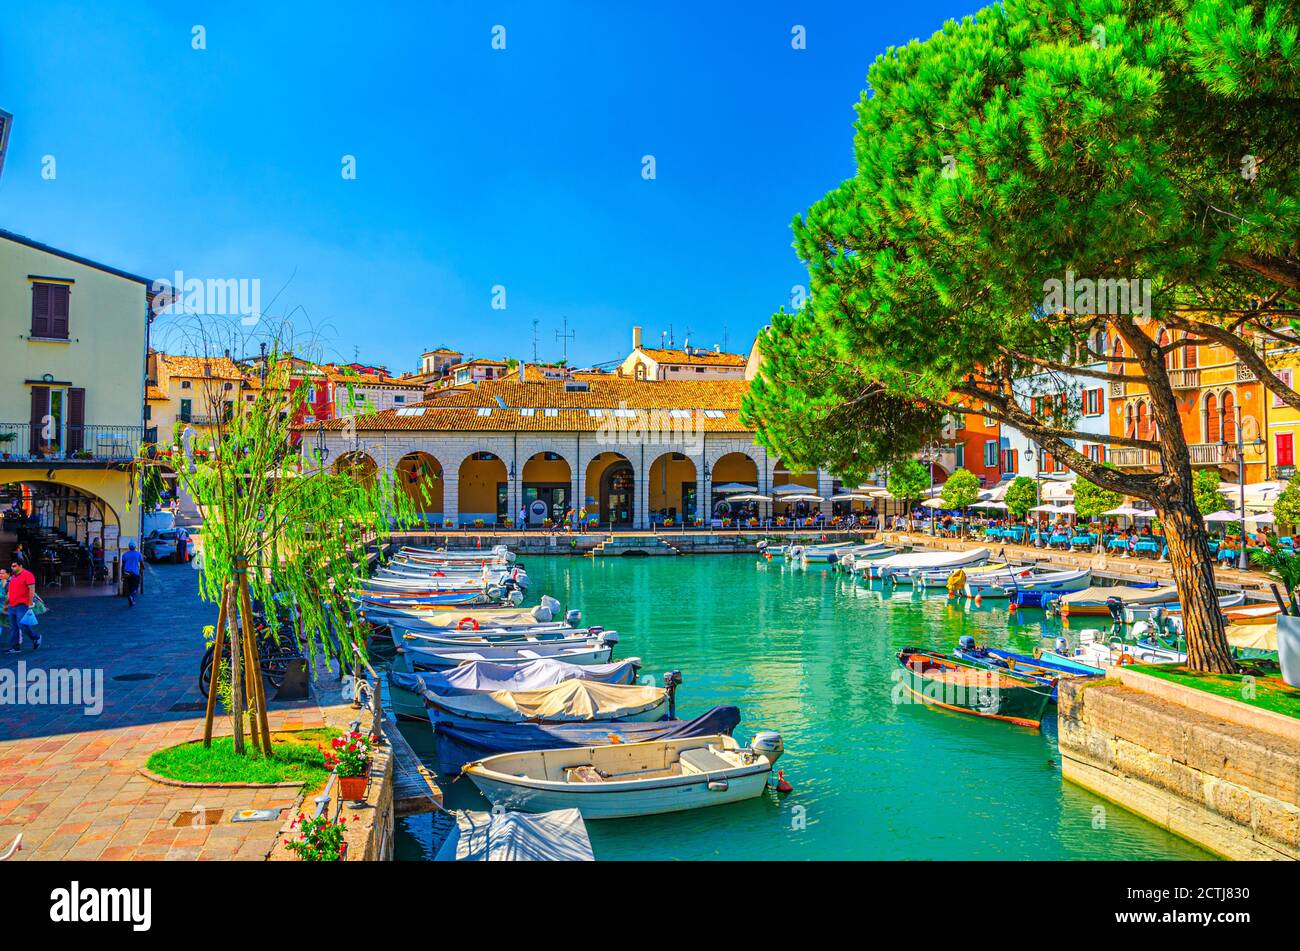 Desenzano del Garda, Italy, September 11, 2019: Old harbour with boats on turquoise water, green trees, street restaurants and traditional buildings in historical town centre, blue sky, Lombardy Stock Photo